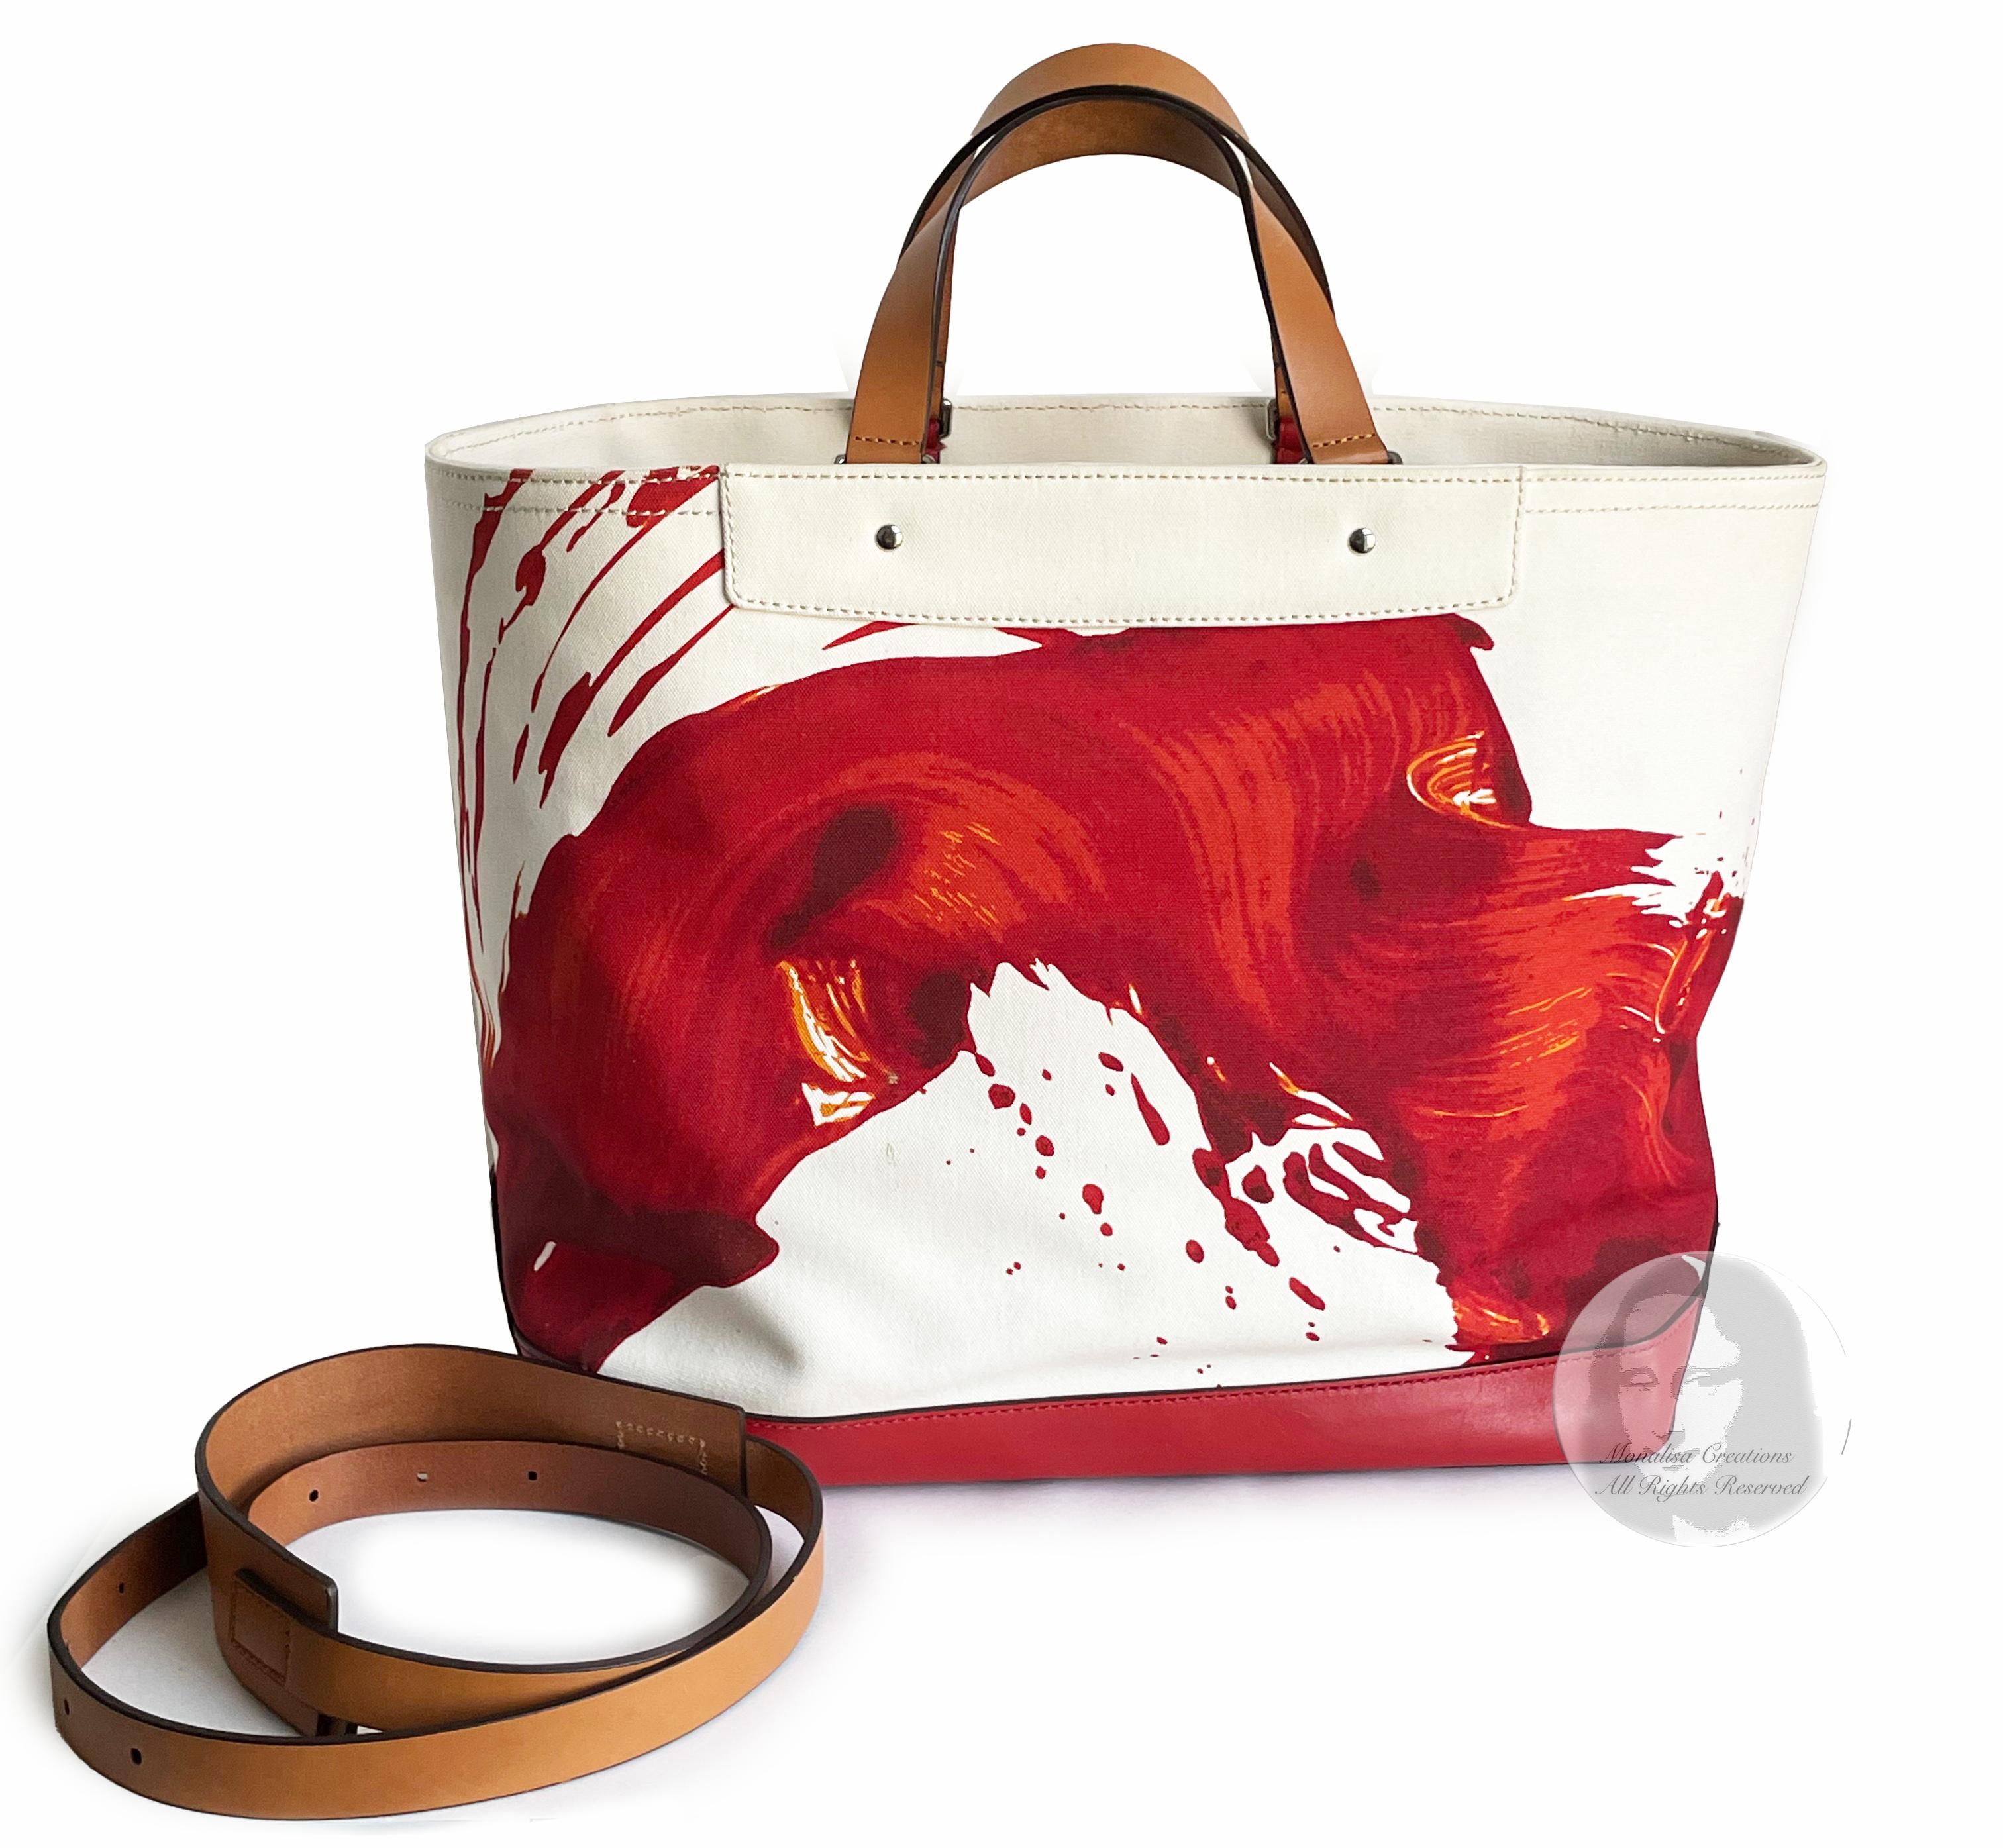 Authentic, preowned James Nares x Coach Leatherware extra large canvas and leather tote bag. This was a 2012 collaboration between artist James Nares & Coach Leatherware, with a limited edition of 175 bags.   Made from canvas and trimmed in cherry